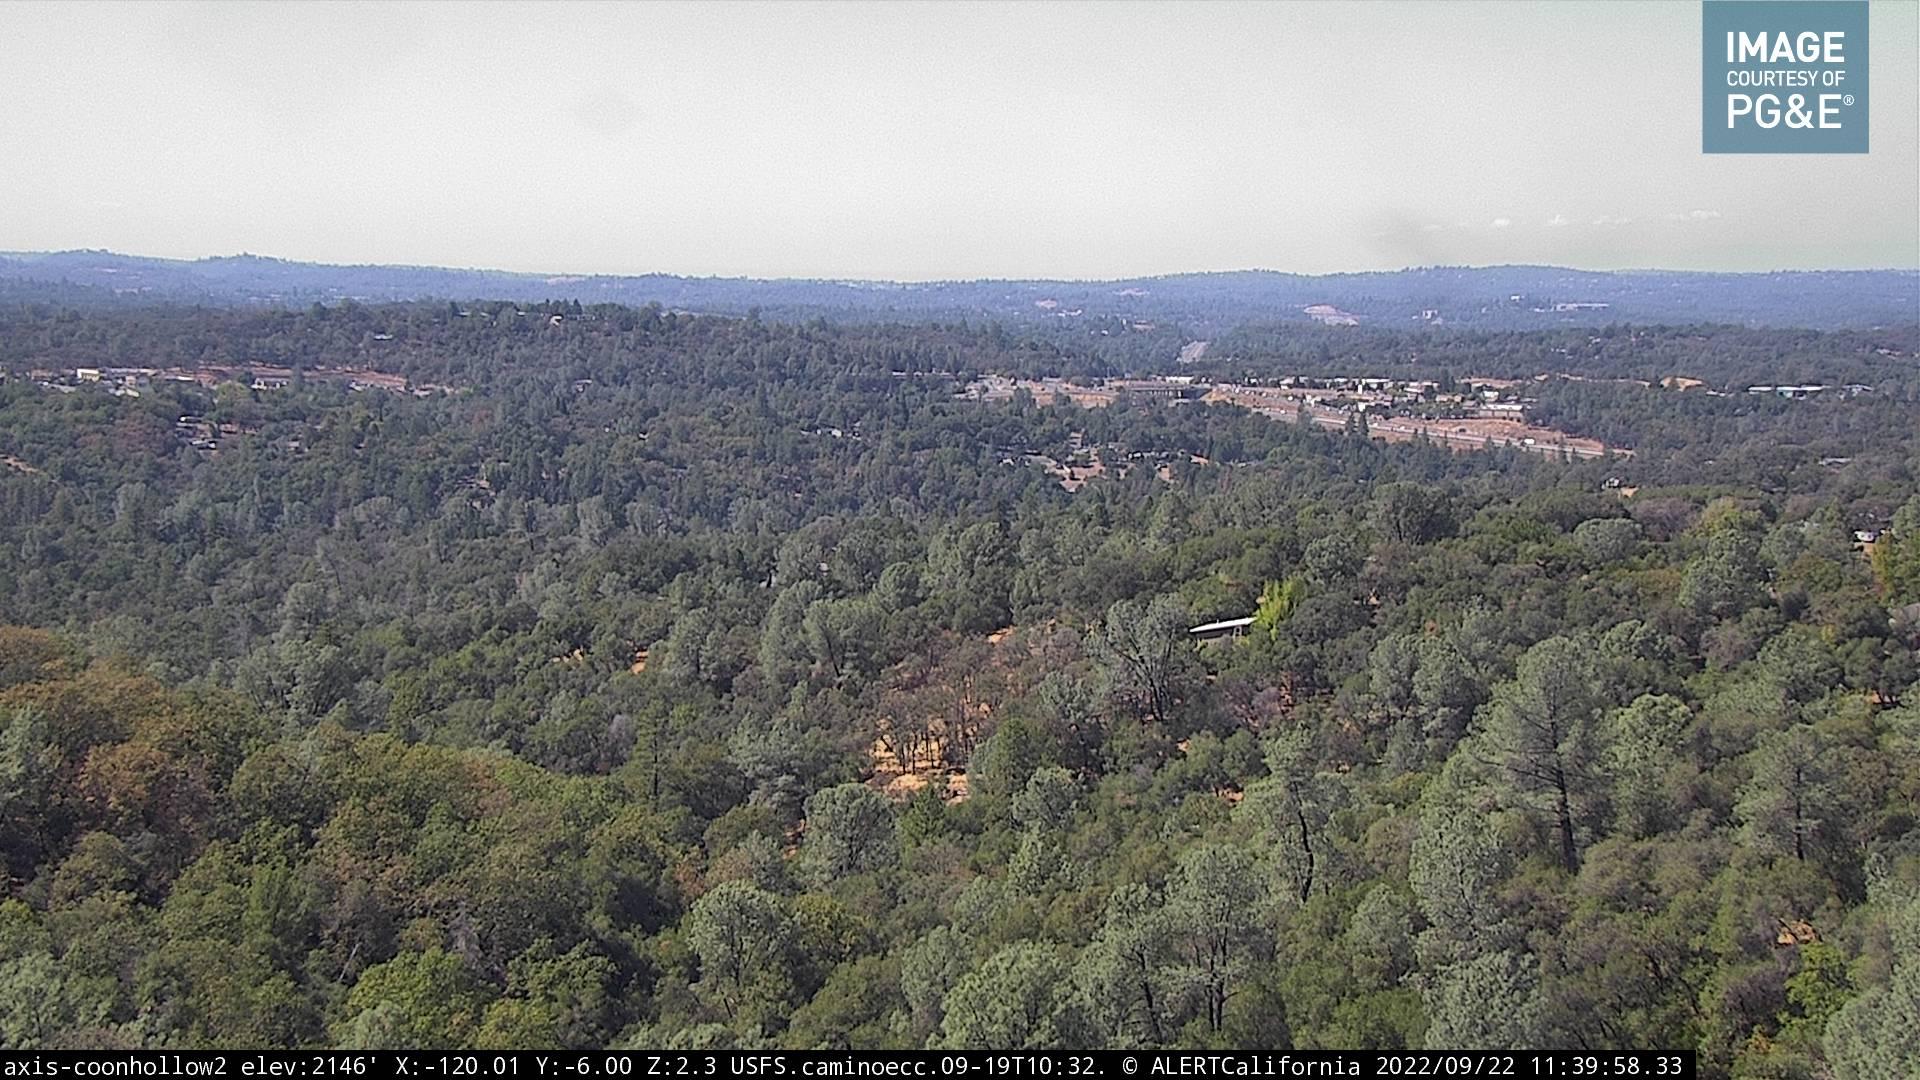 Placerville: Coon Hollow Traffic Camera